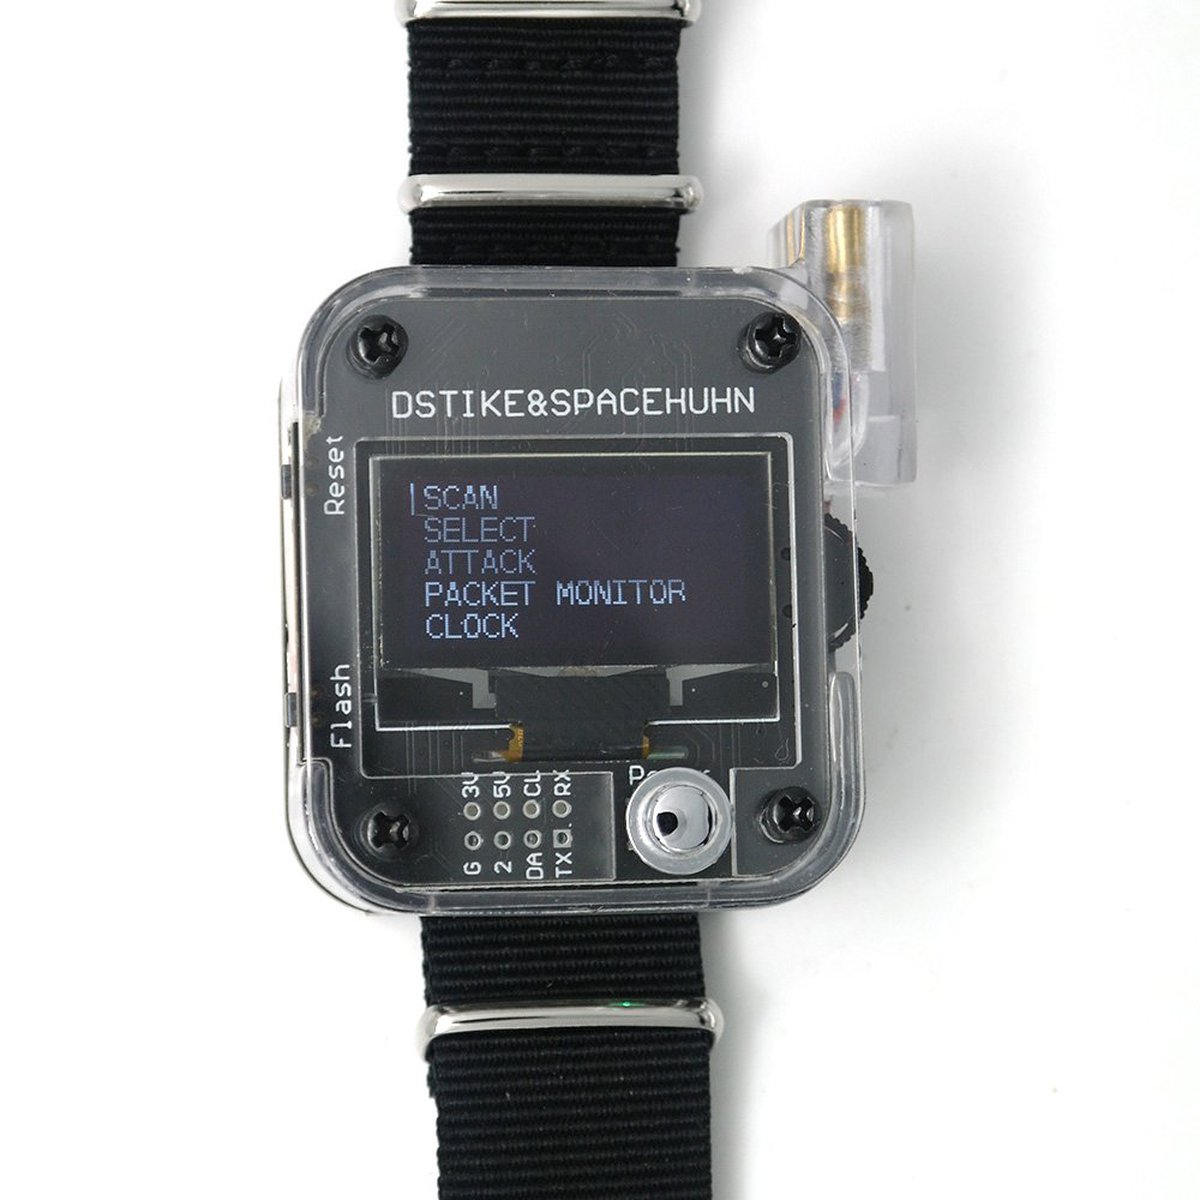 Deauther Watch V3: A smartwatch aimed at hackers and penetration testers -   News